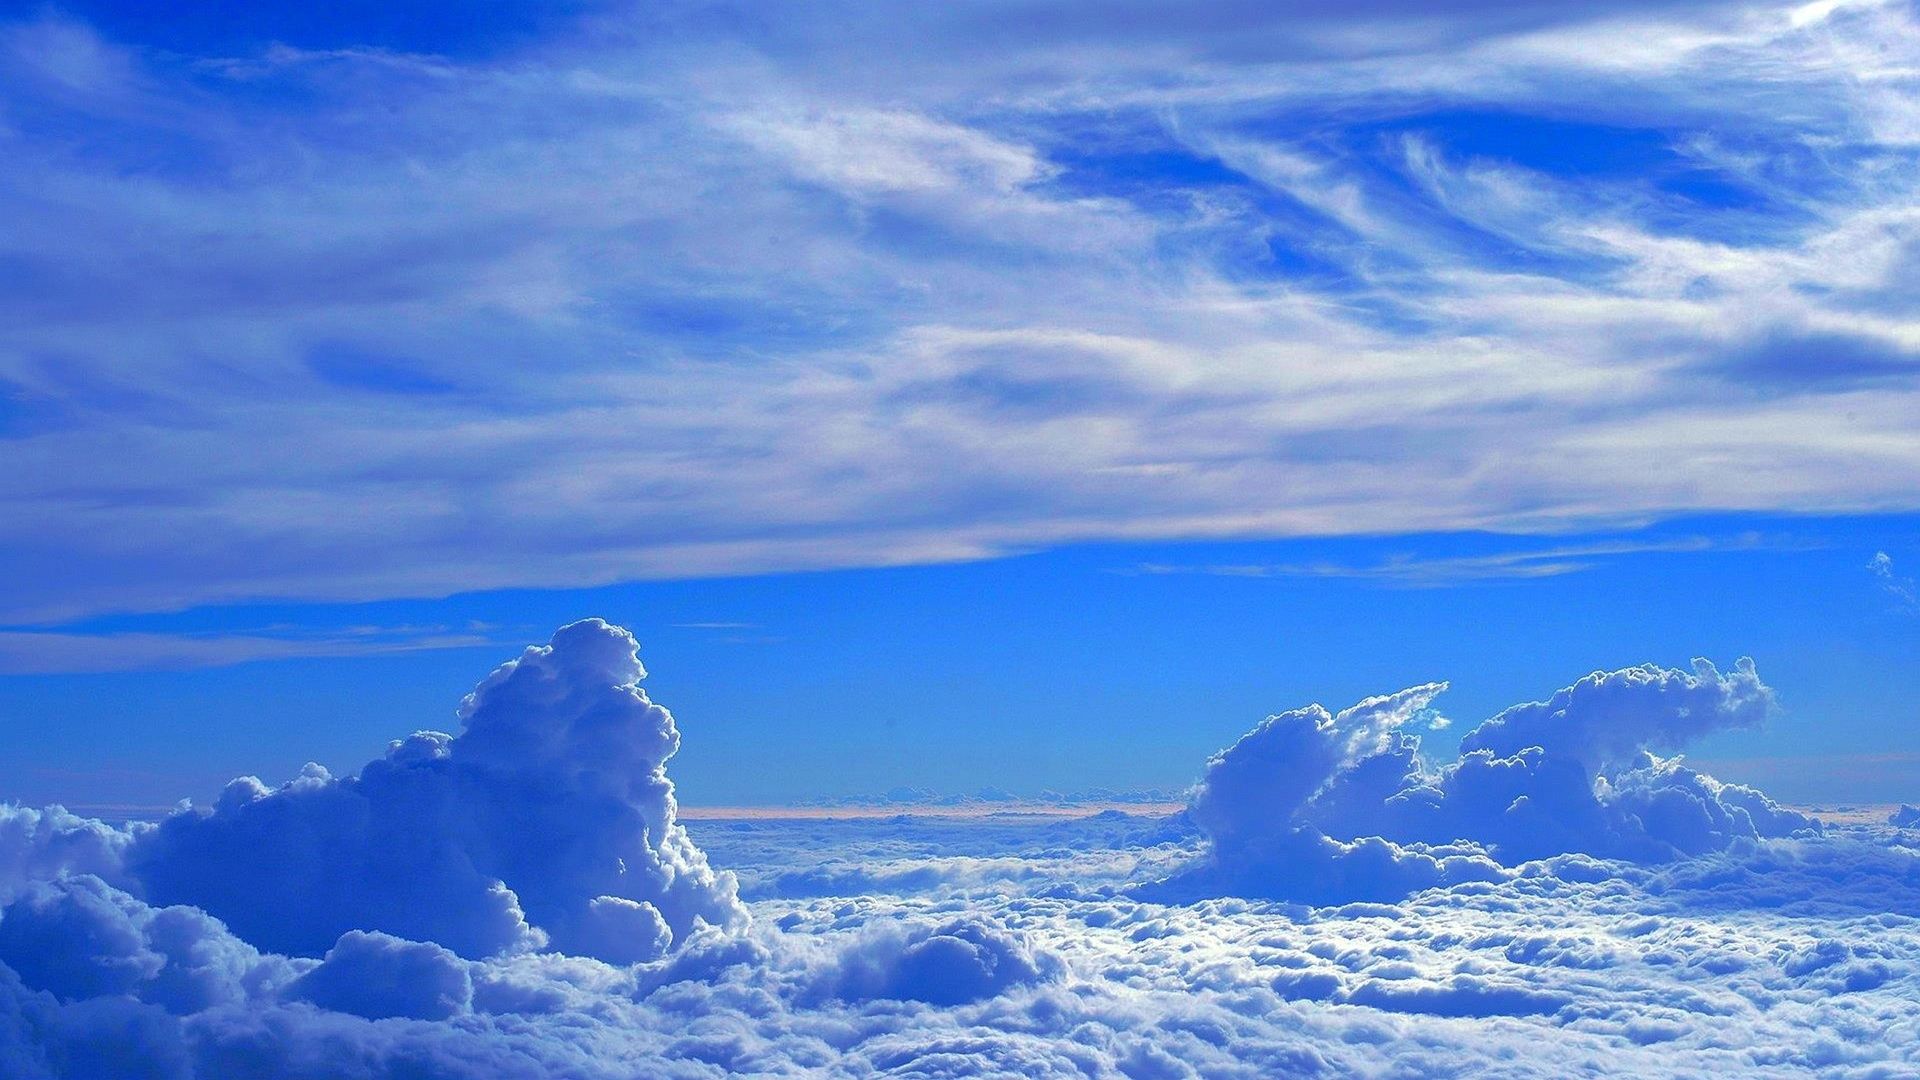 Beautiful Clouds Wallpapers Wallpapers